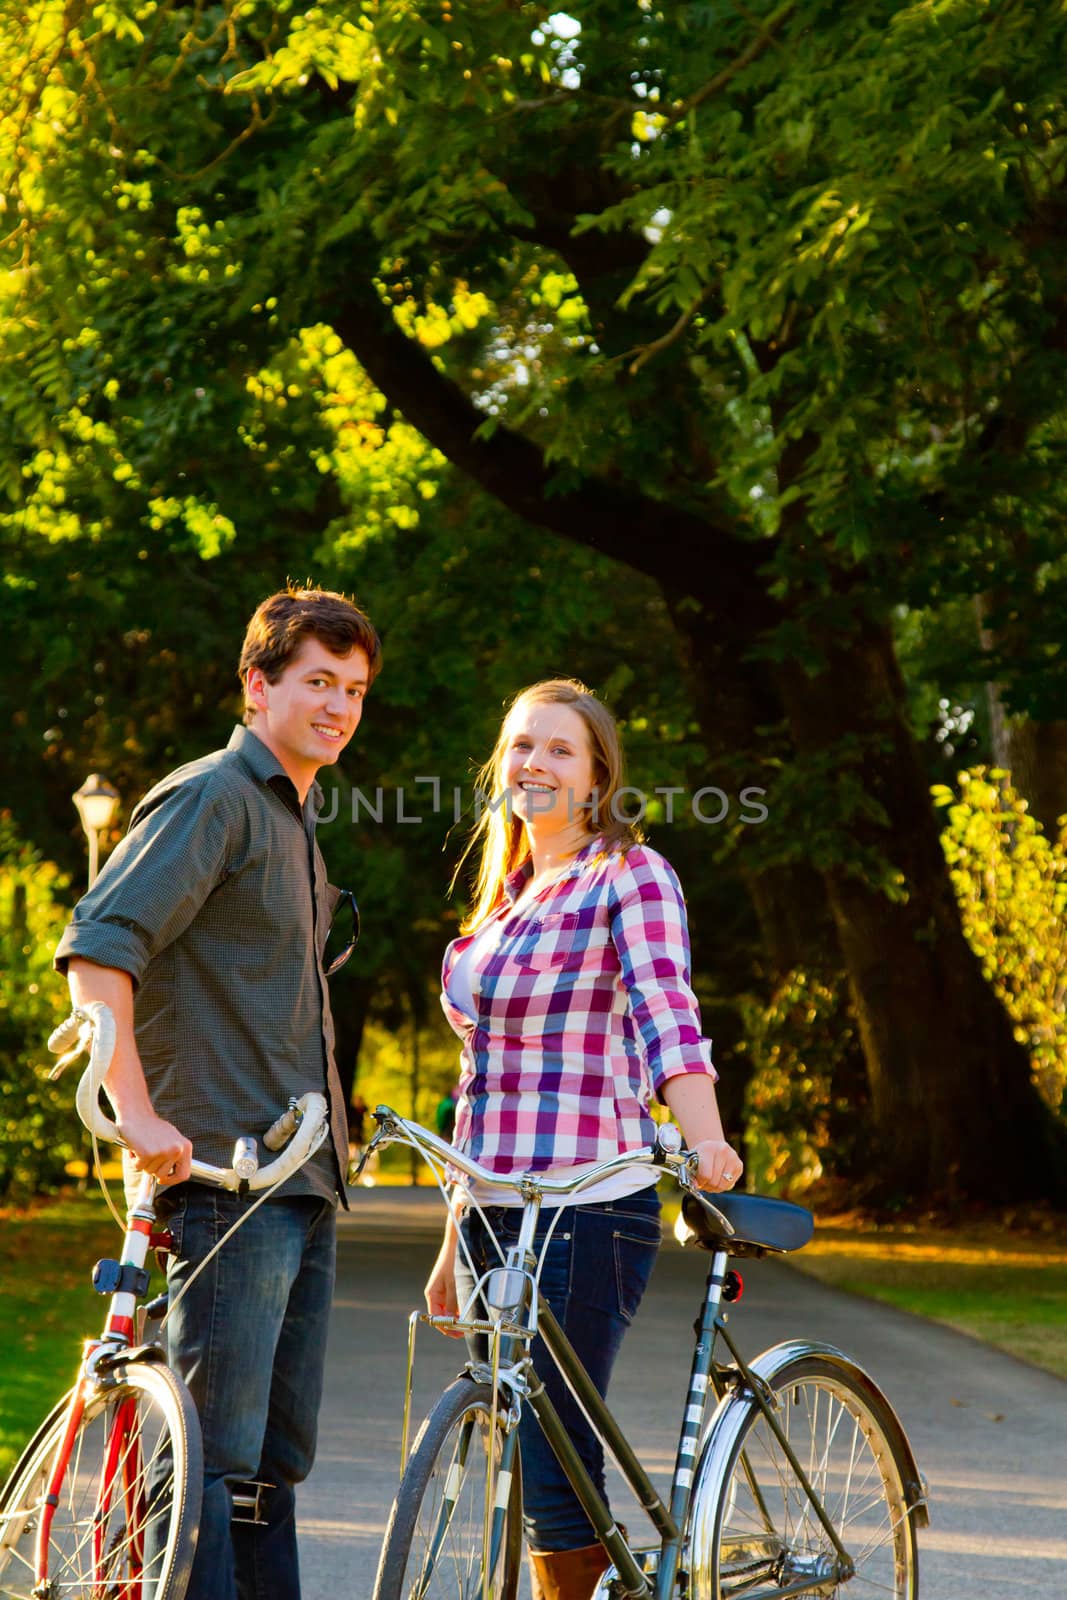 A man and a woman with their bicycles on a bike path in an outdoor park setting.